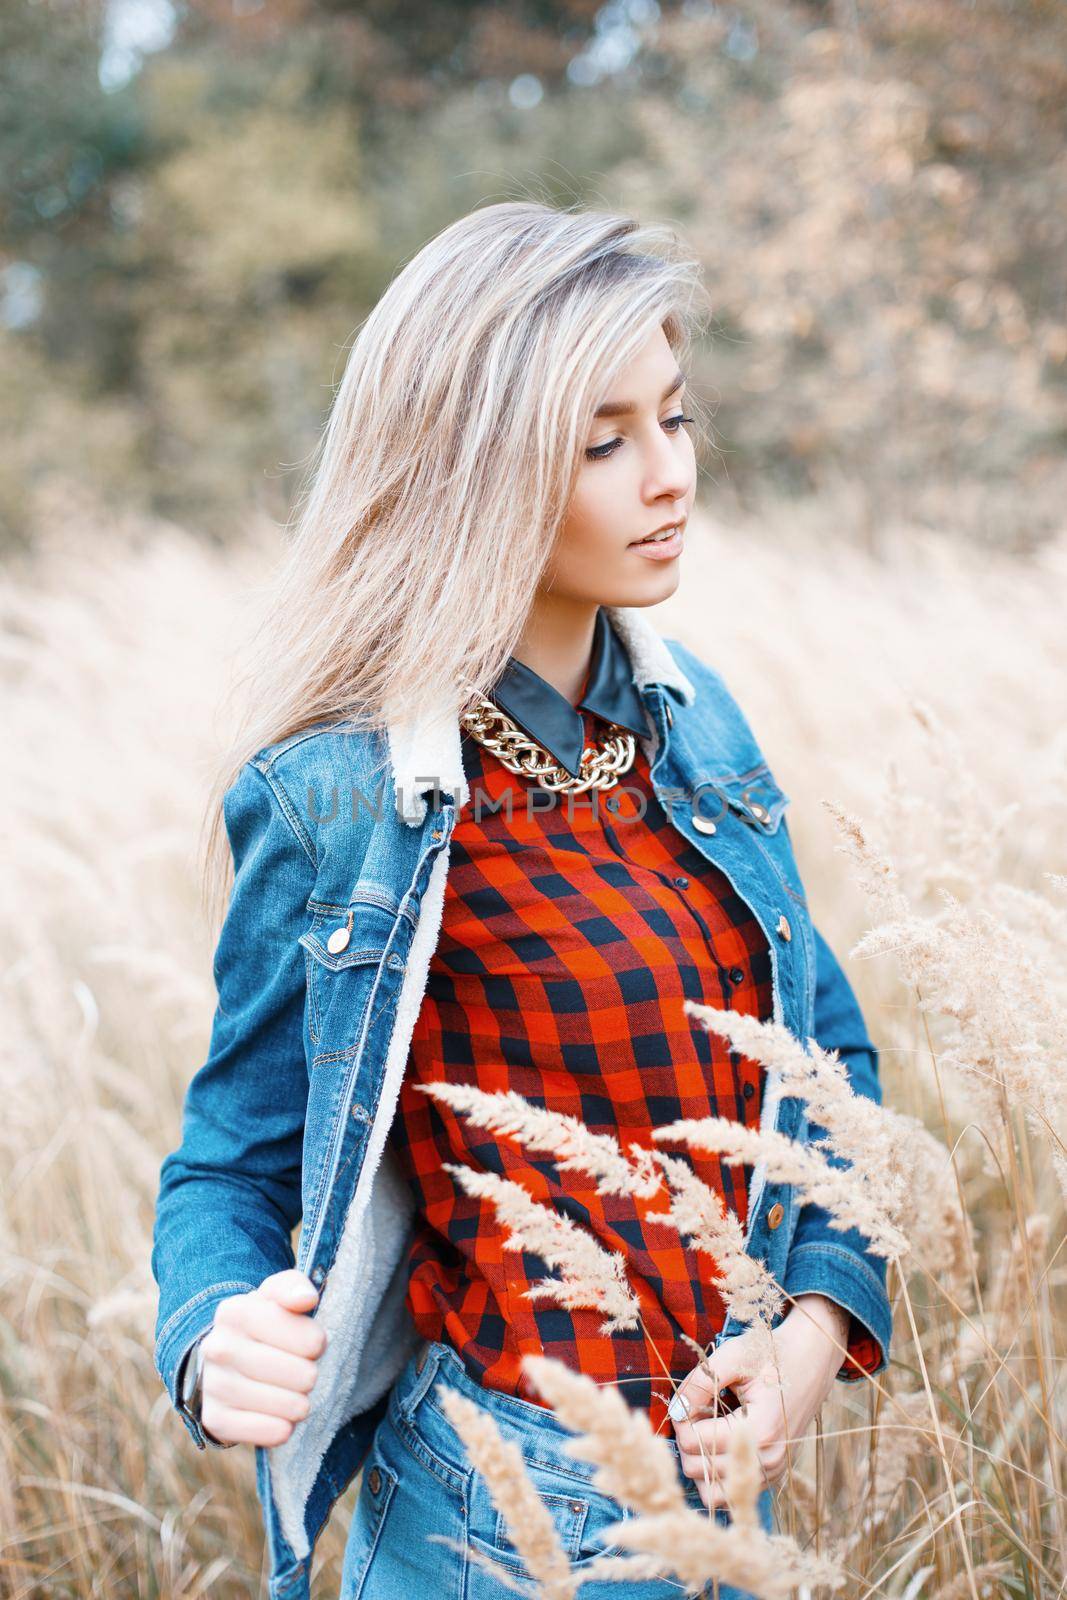 Fashionable stylish girl in a denim dress and a red checkered shirt in the autumn field with grass by alones